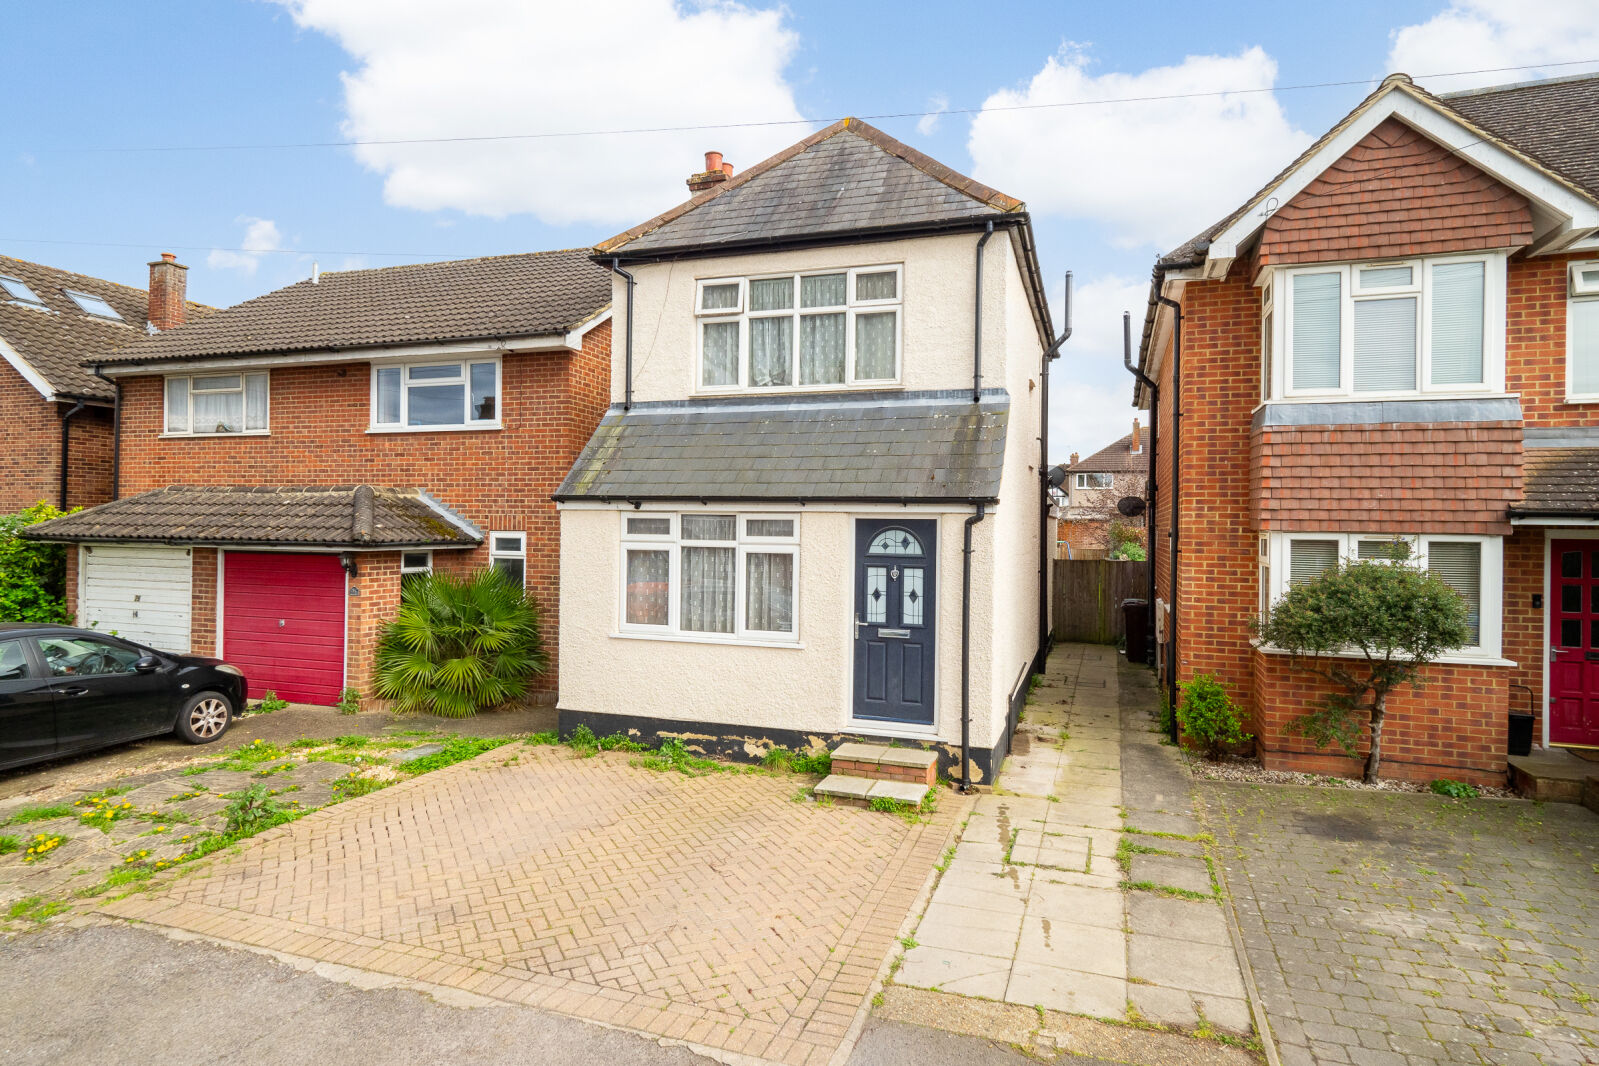 2 bedroom detached house for sale St. Albans Road, Cheam, SM1, main image